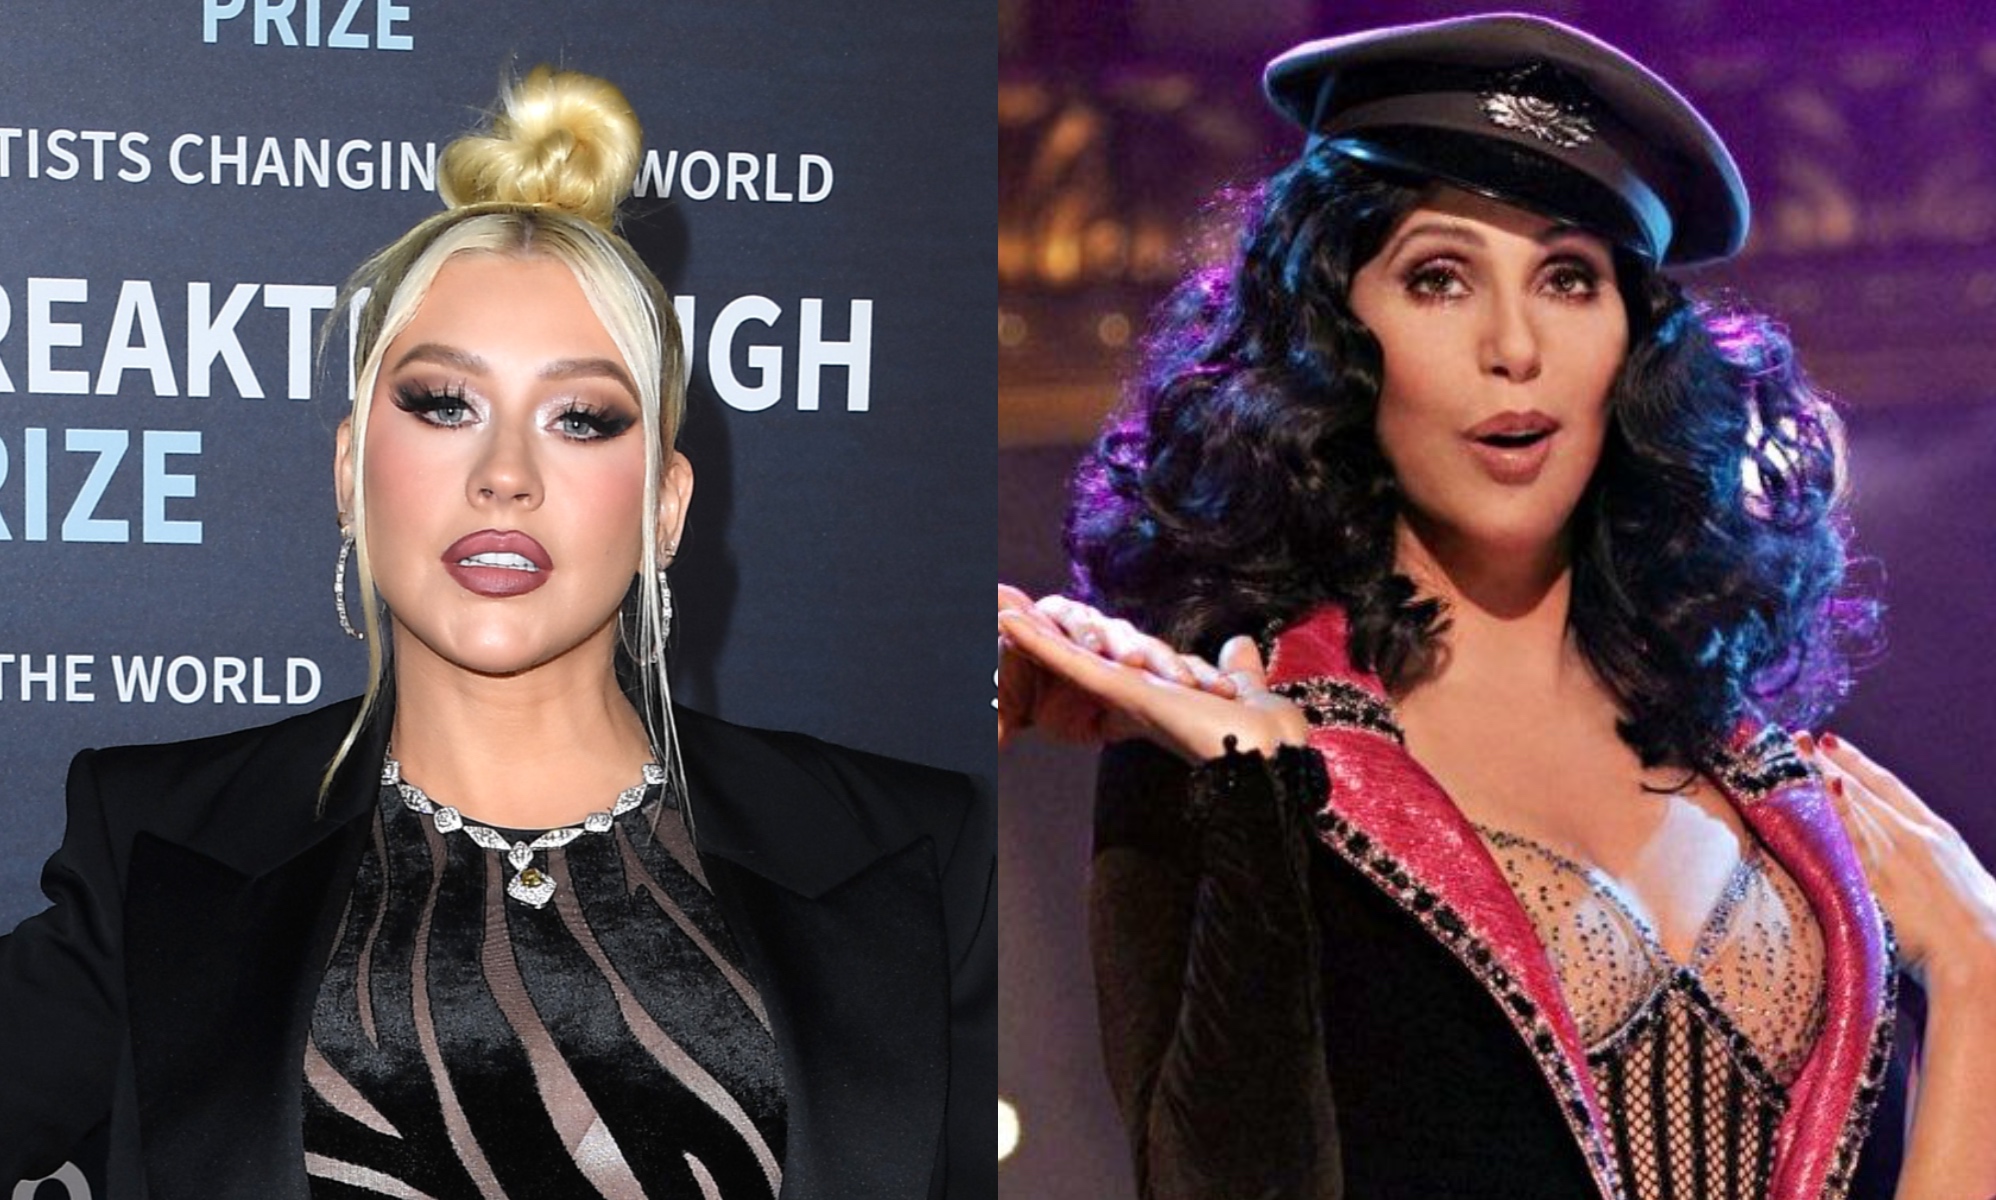 Christina Aguilera Goes as Cher in 'Burlesque' for Halloween